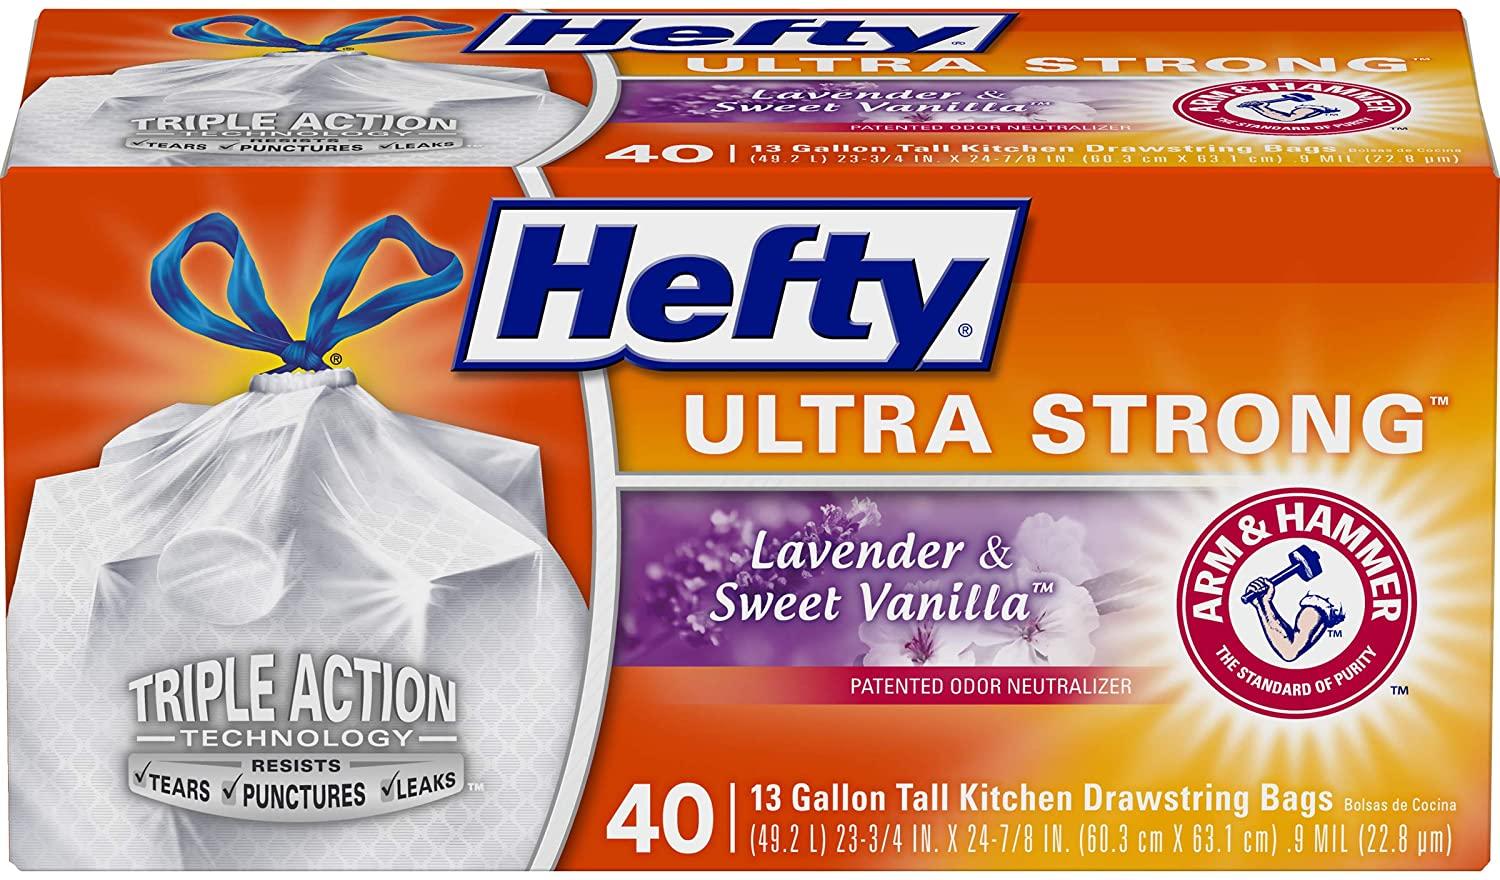 40 Hefty Lavender Ultra Strong Tall Kitchen Trash Bags for $5.33